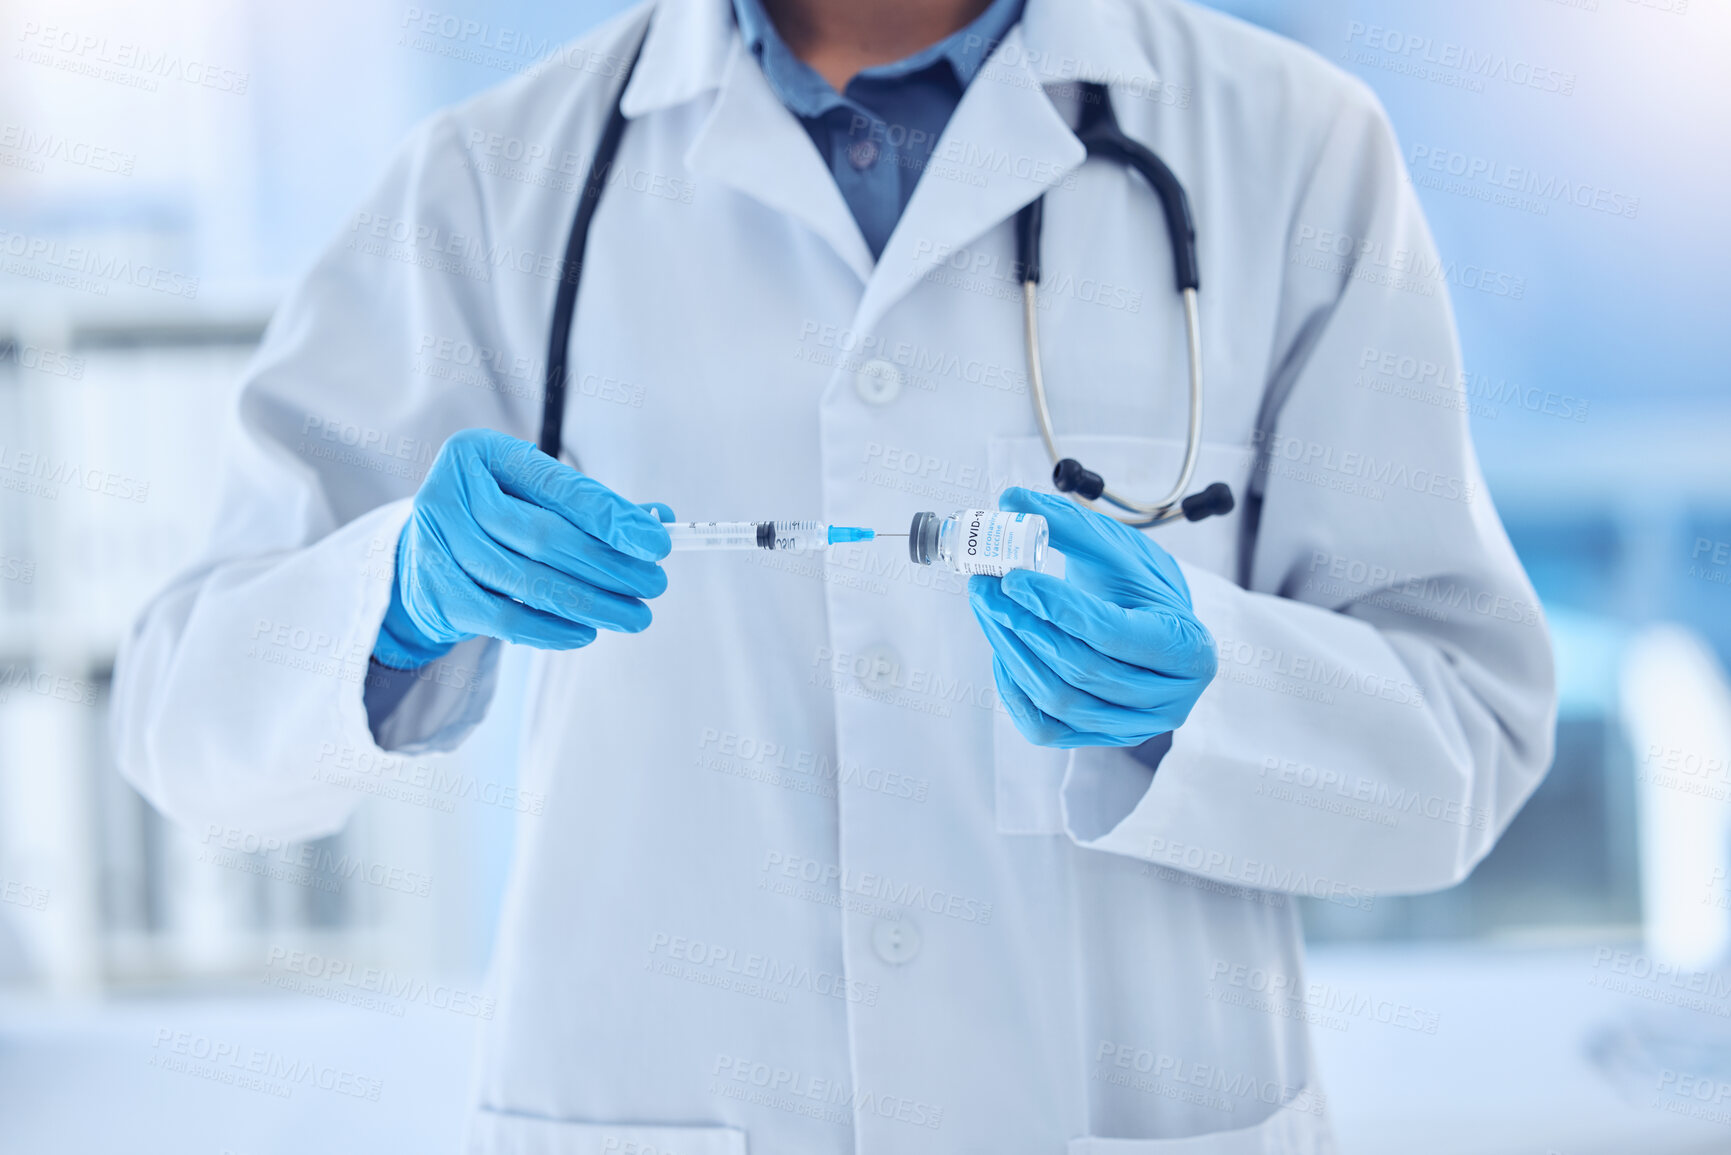 Buy stock photo doctor wearing a labcoat and gloves preparing a covid vaccine while working in a hospital. Unrecognizable scientist removing liquid from a vial using a syringe while working at a lab